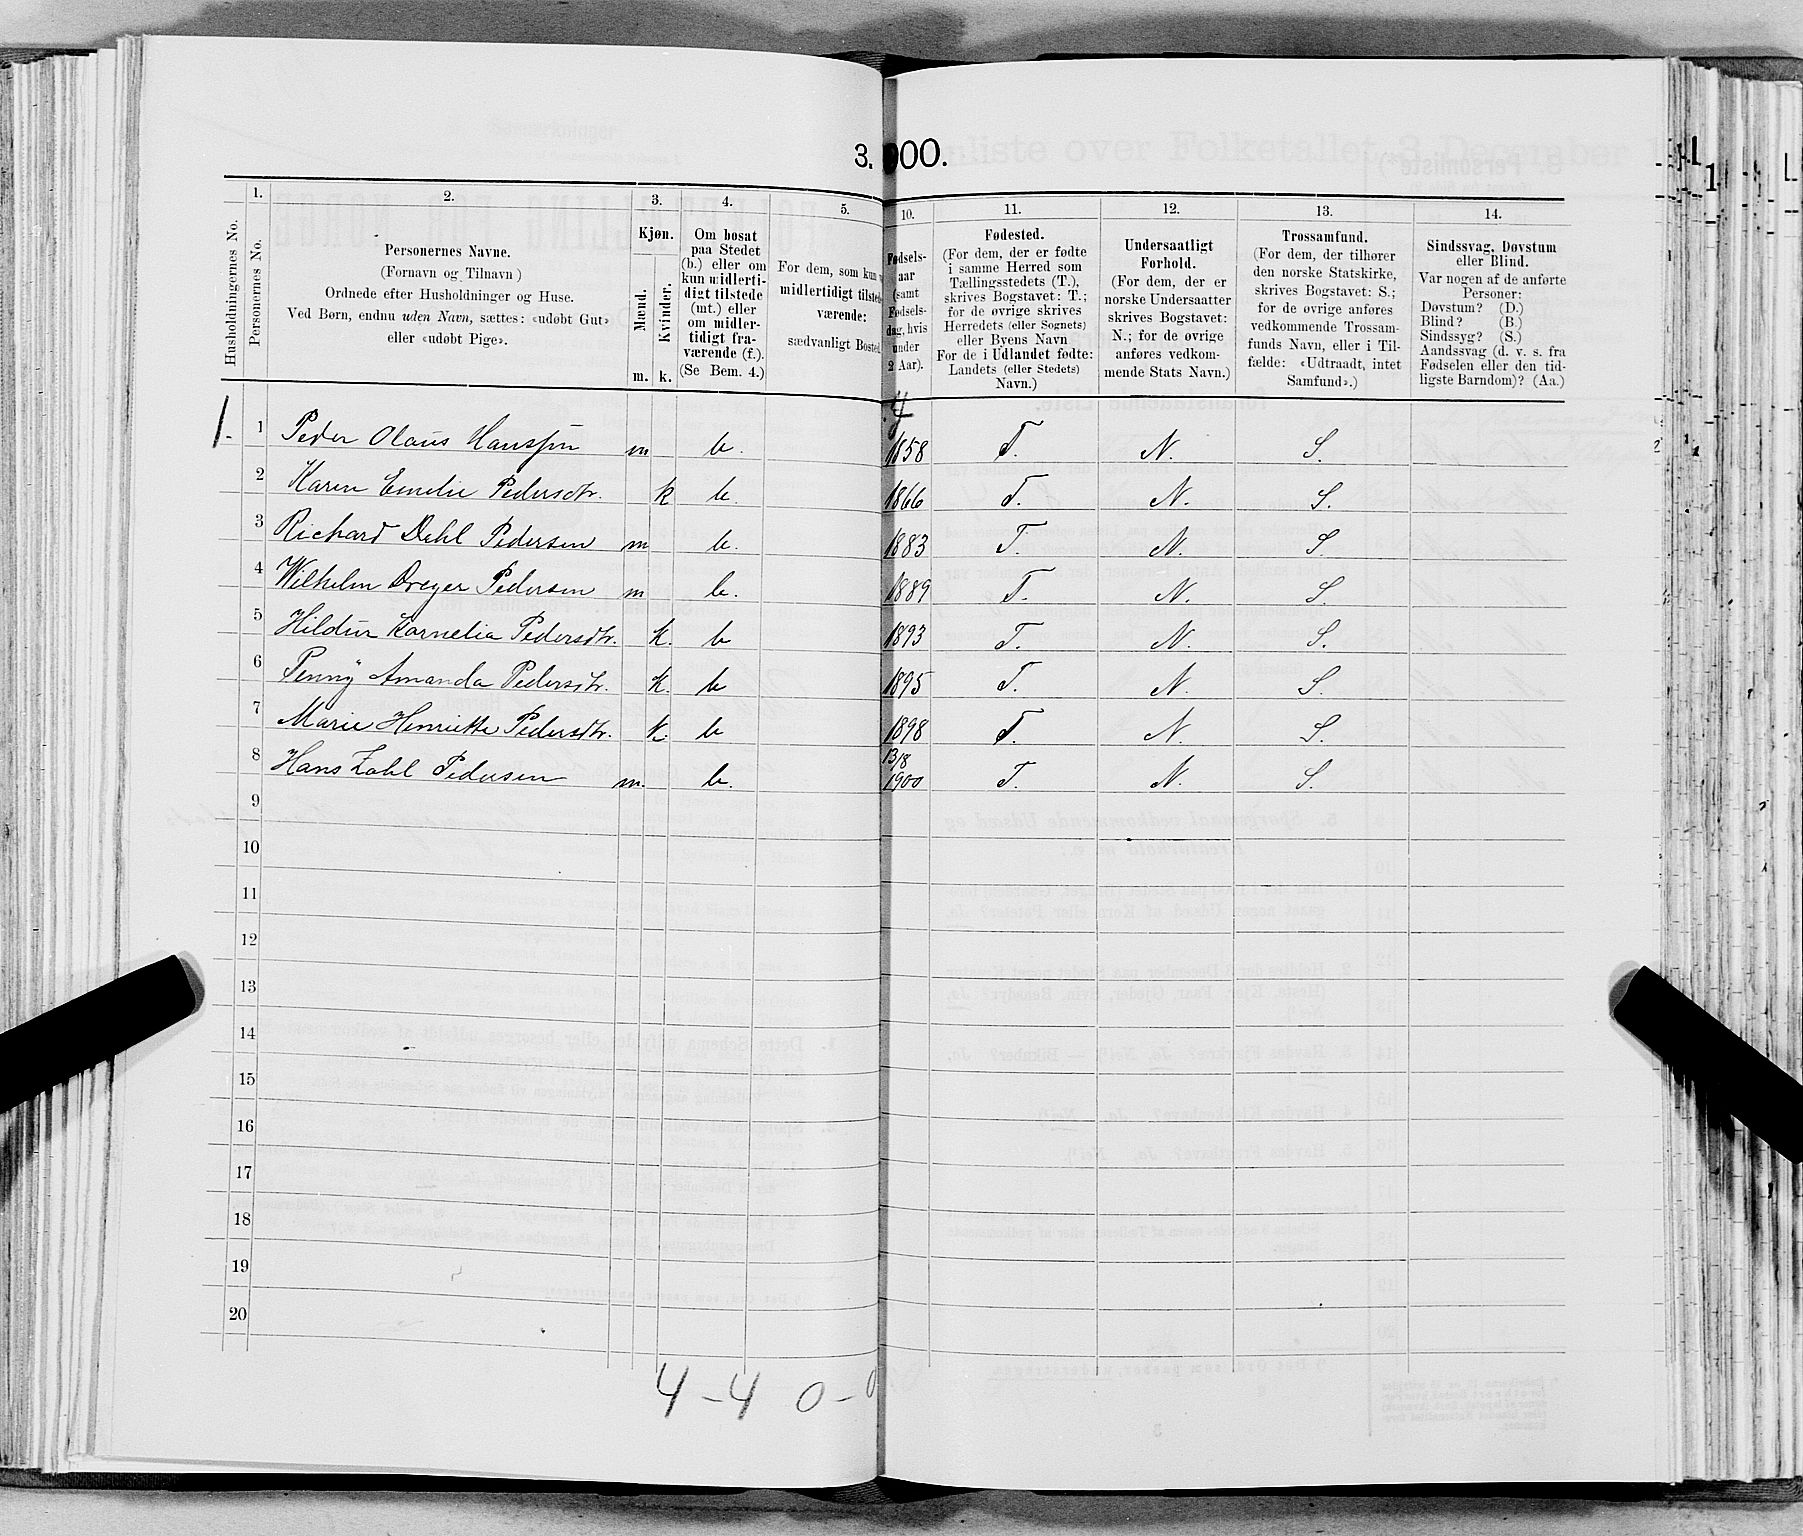 SAT, 1900 census for Mo, 1900, p. 180